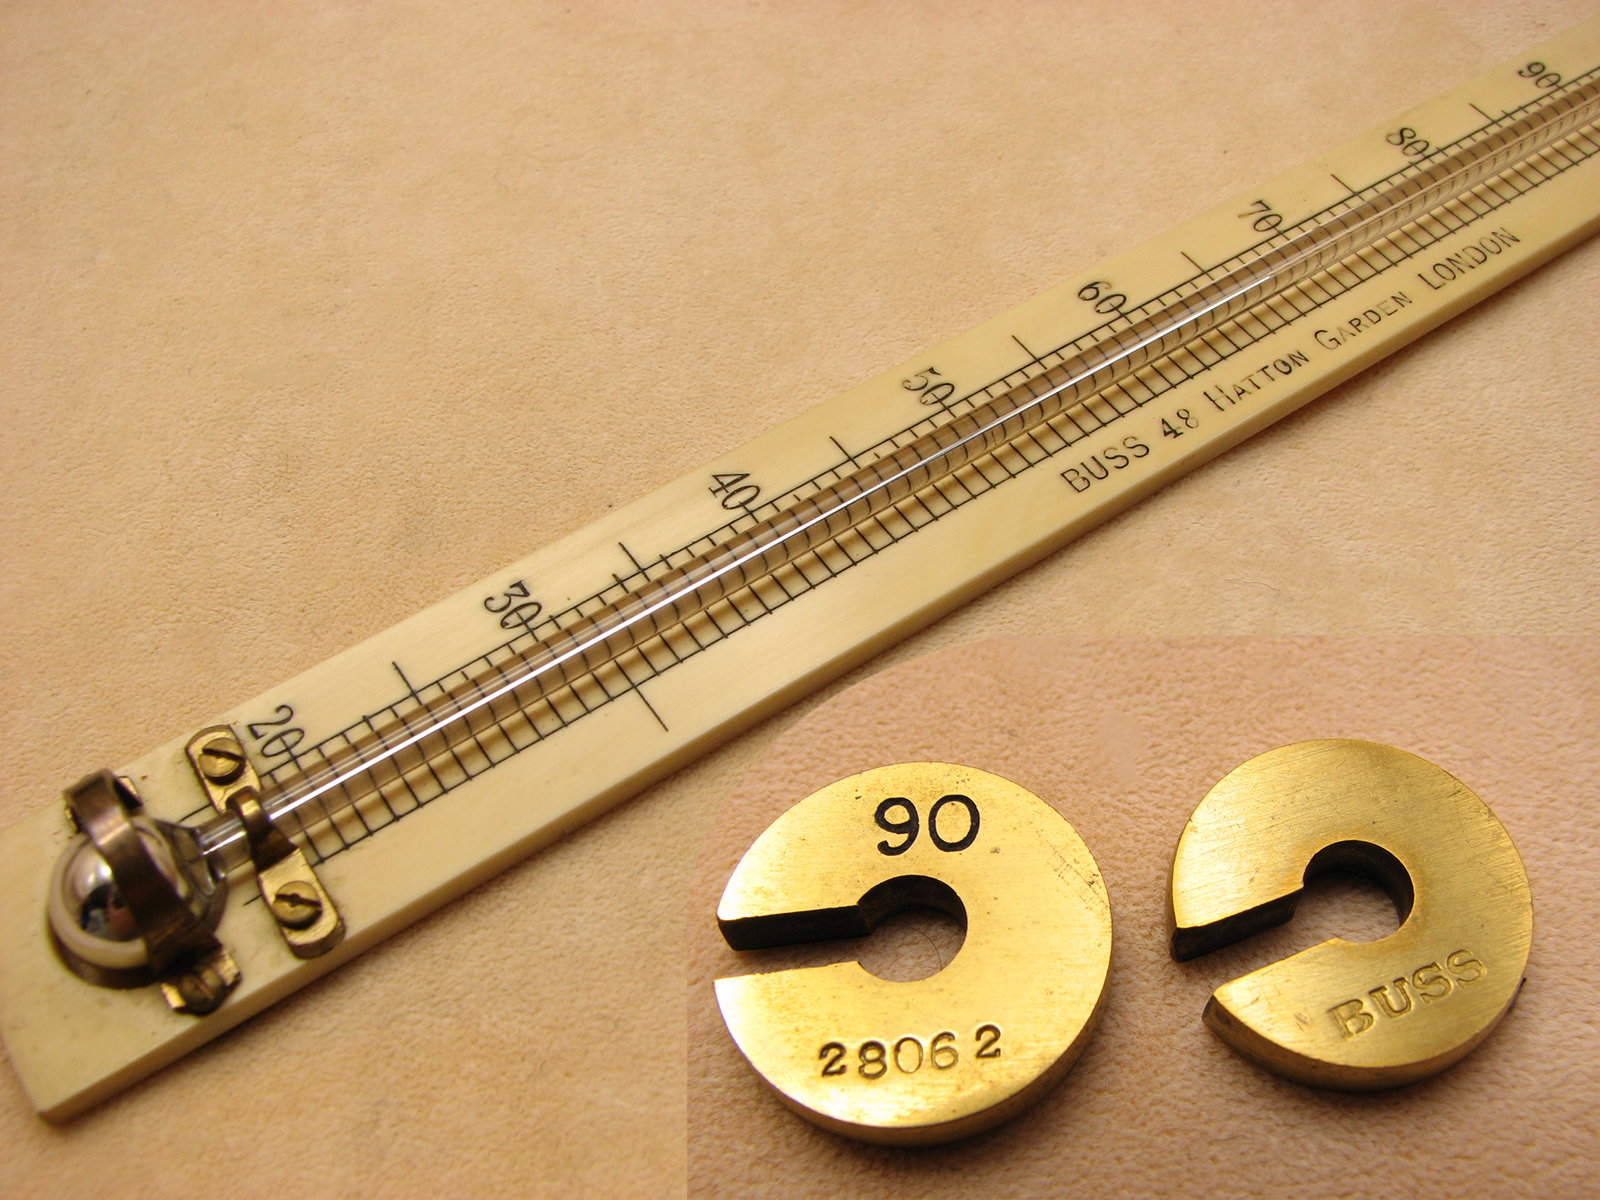 Antique Sike's hydrometer set with proof rule by BUSS, 48 Hatton Garden, London